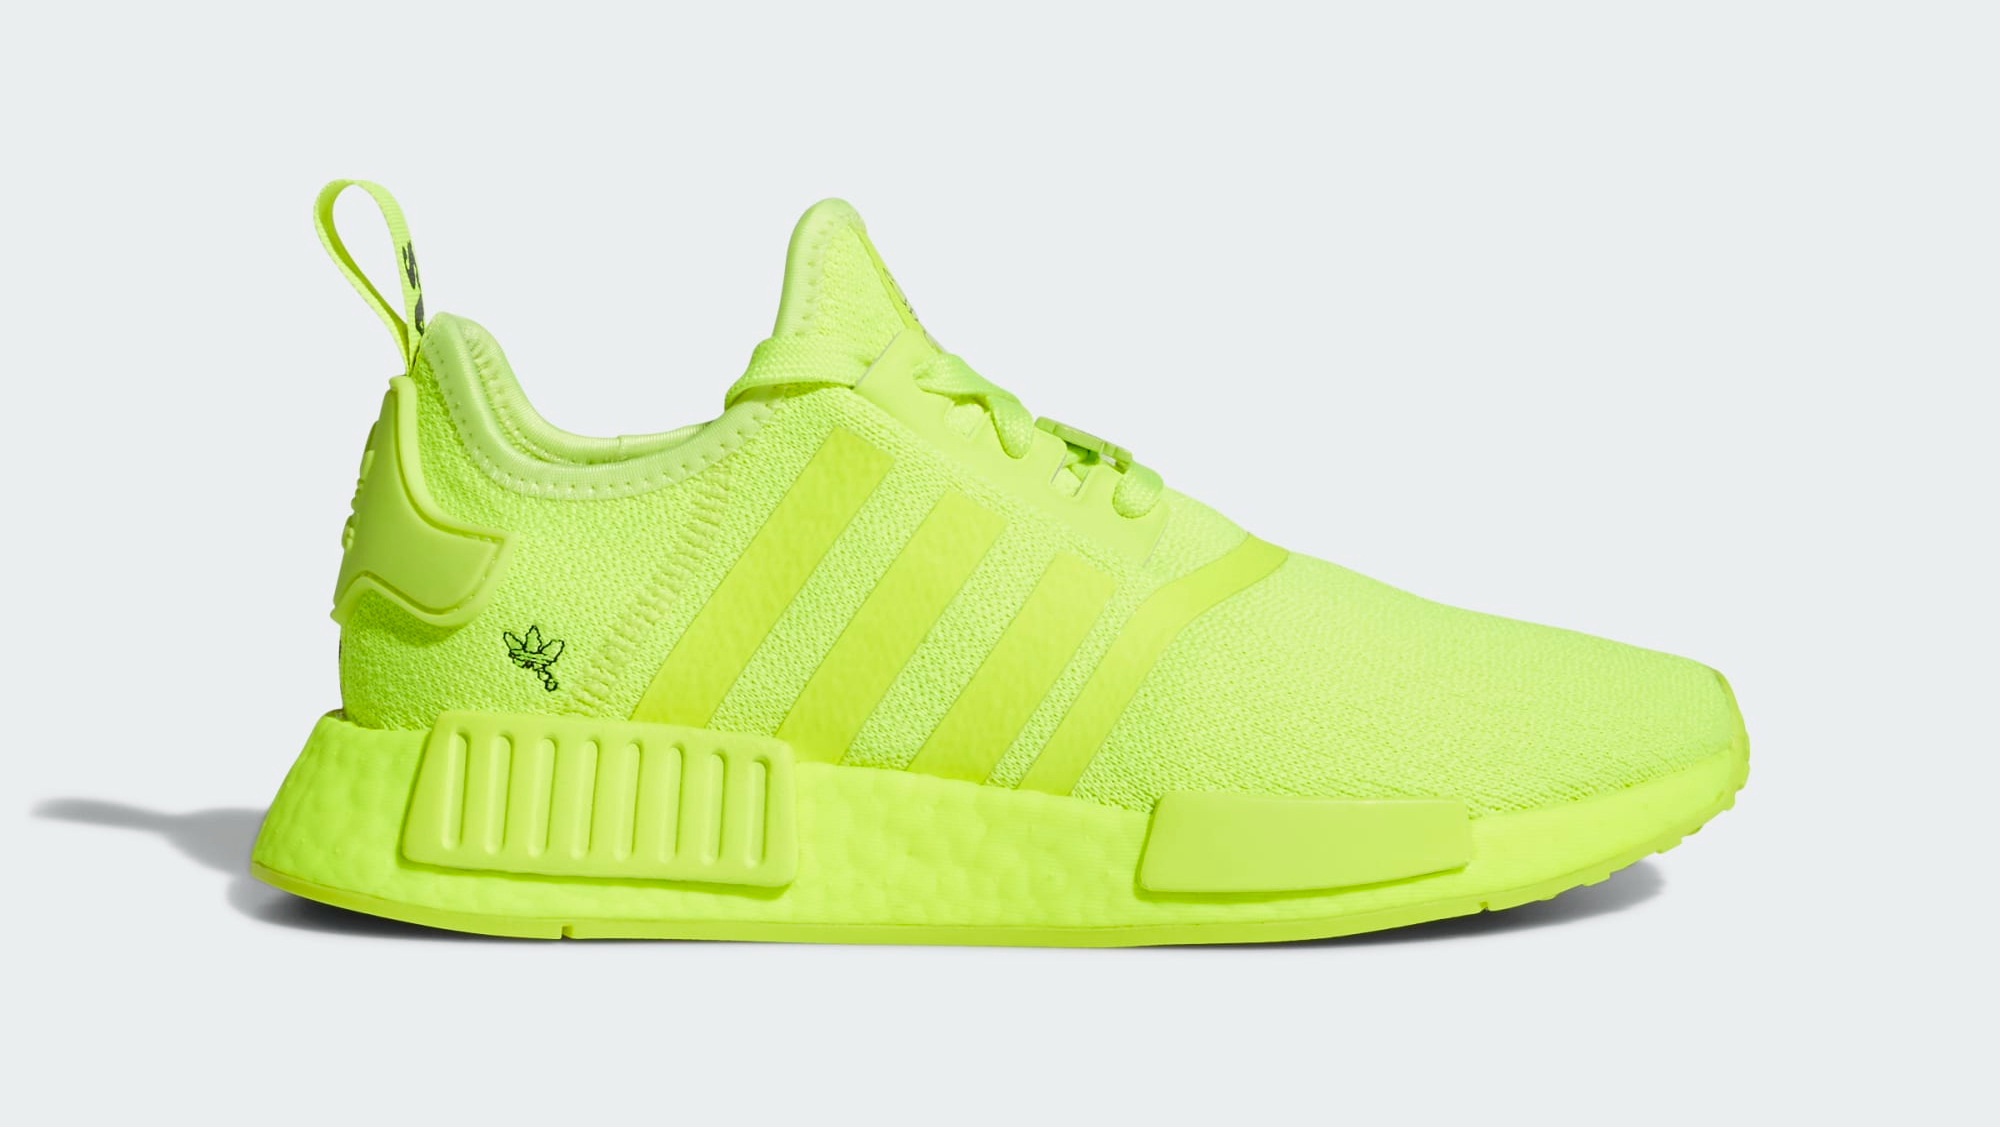 Adidas NMD_R1 Women's Core Black/Solar Yellow/Cloud | Release Dates, Sneaker Calendar, Prices & Collaborations